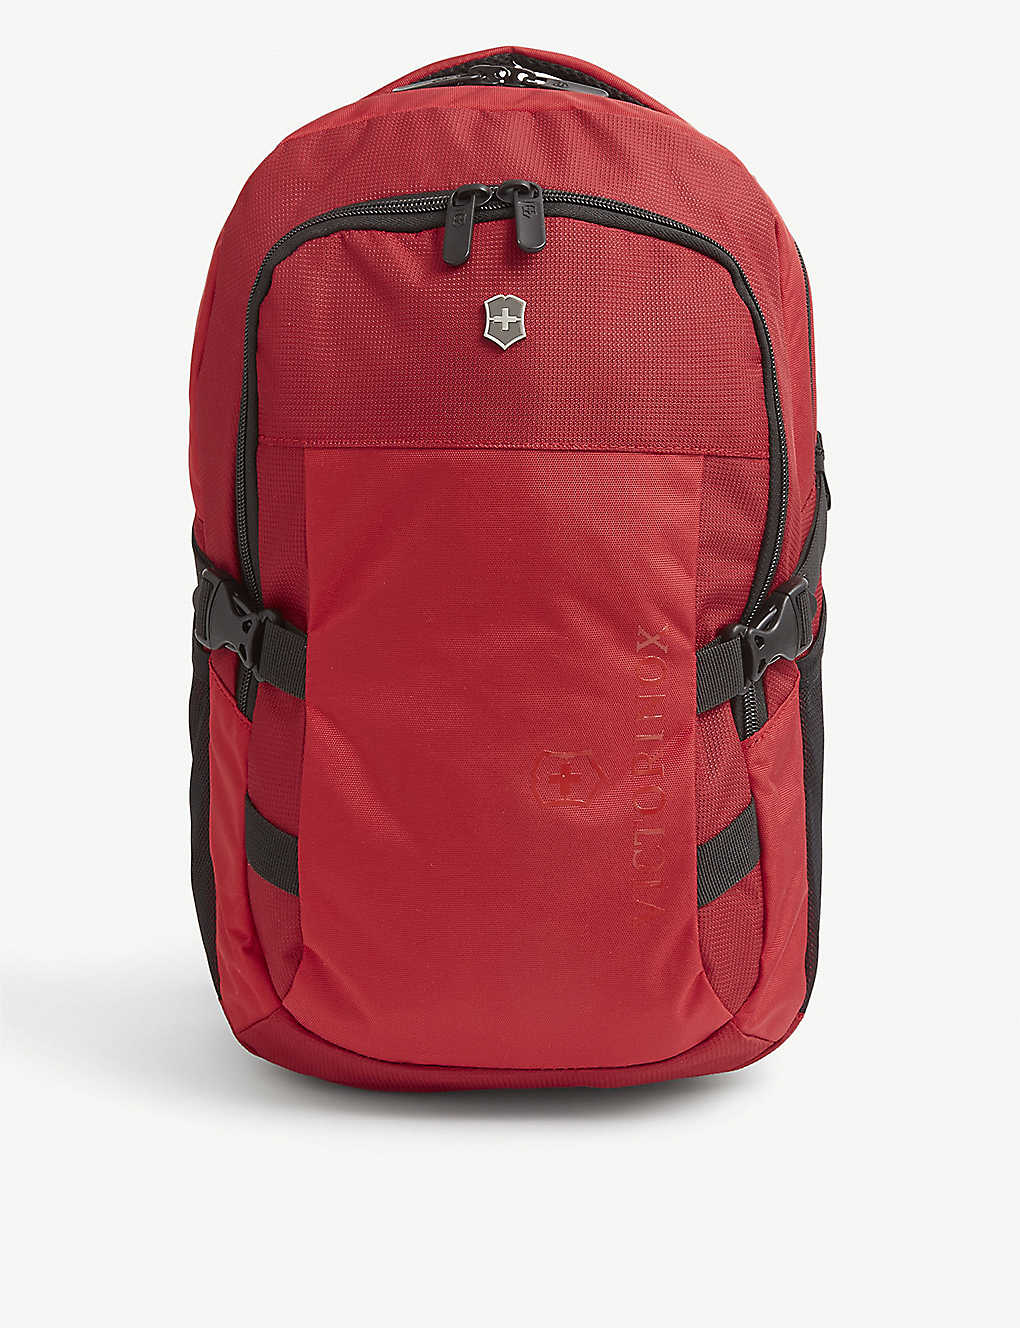 Victorinox Vx Sport Evo Woven Backpack In Red